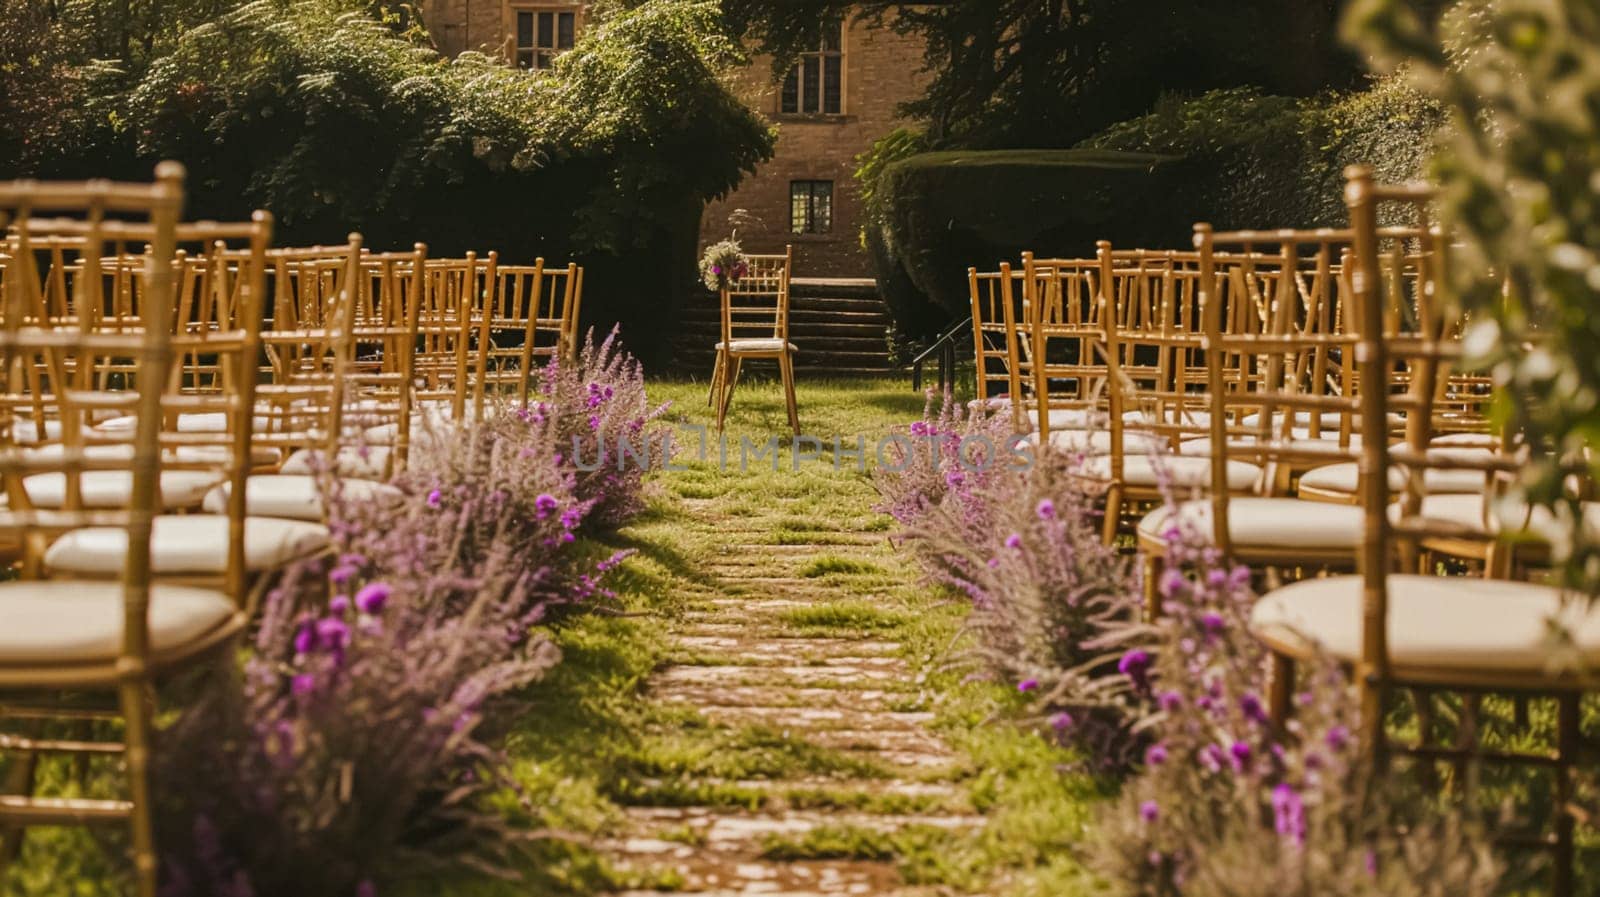 Wedding Ceremony Decorated with Lavender Flowers in the garden by Olayola